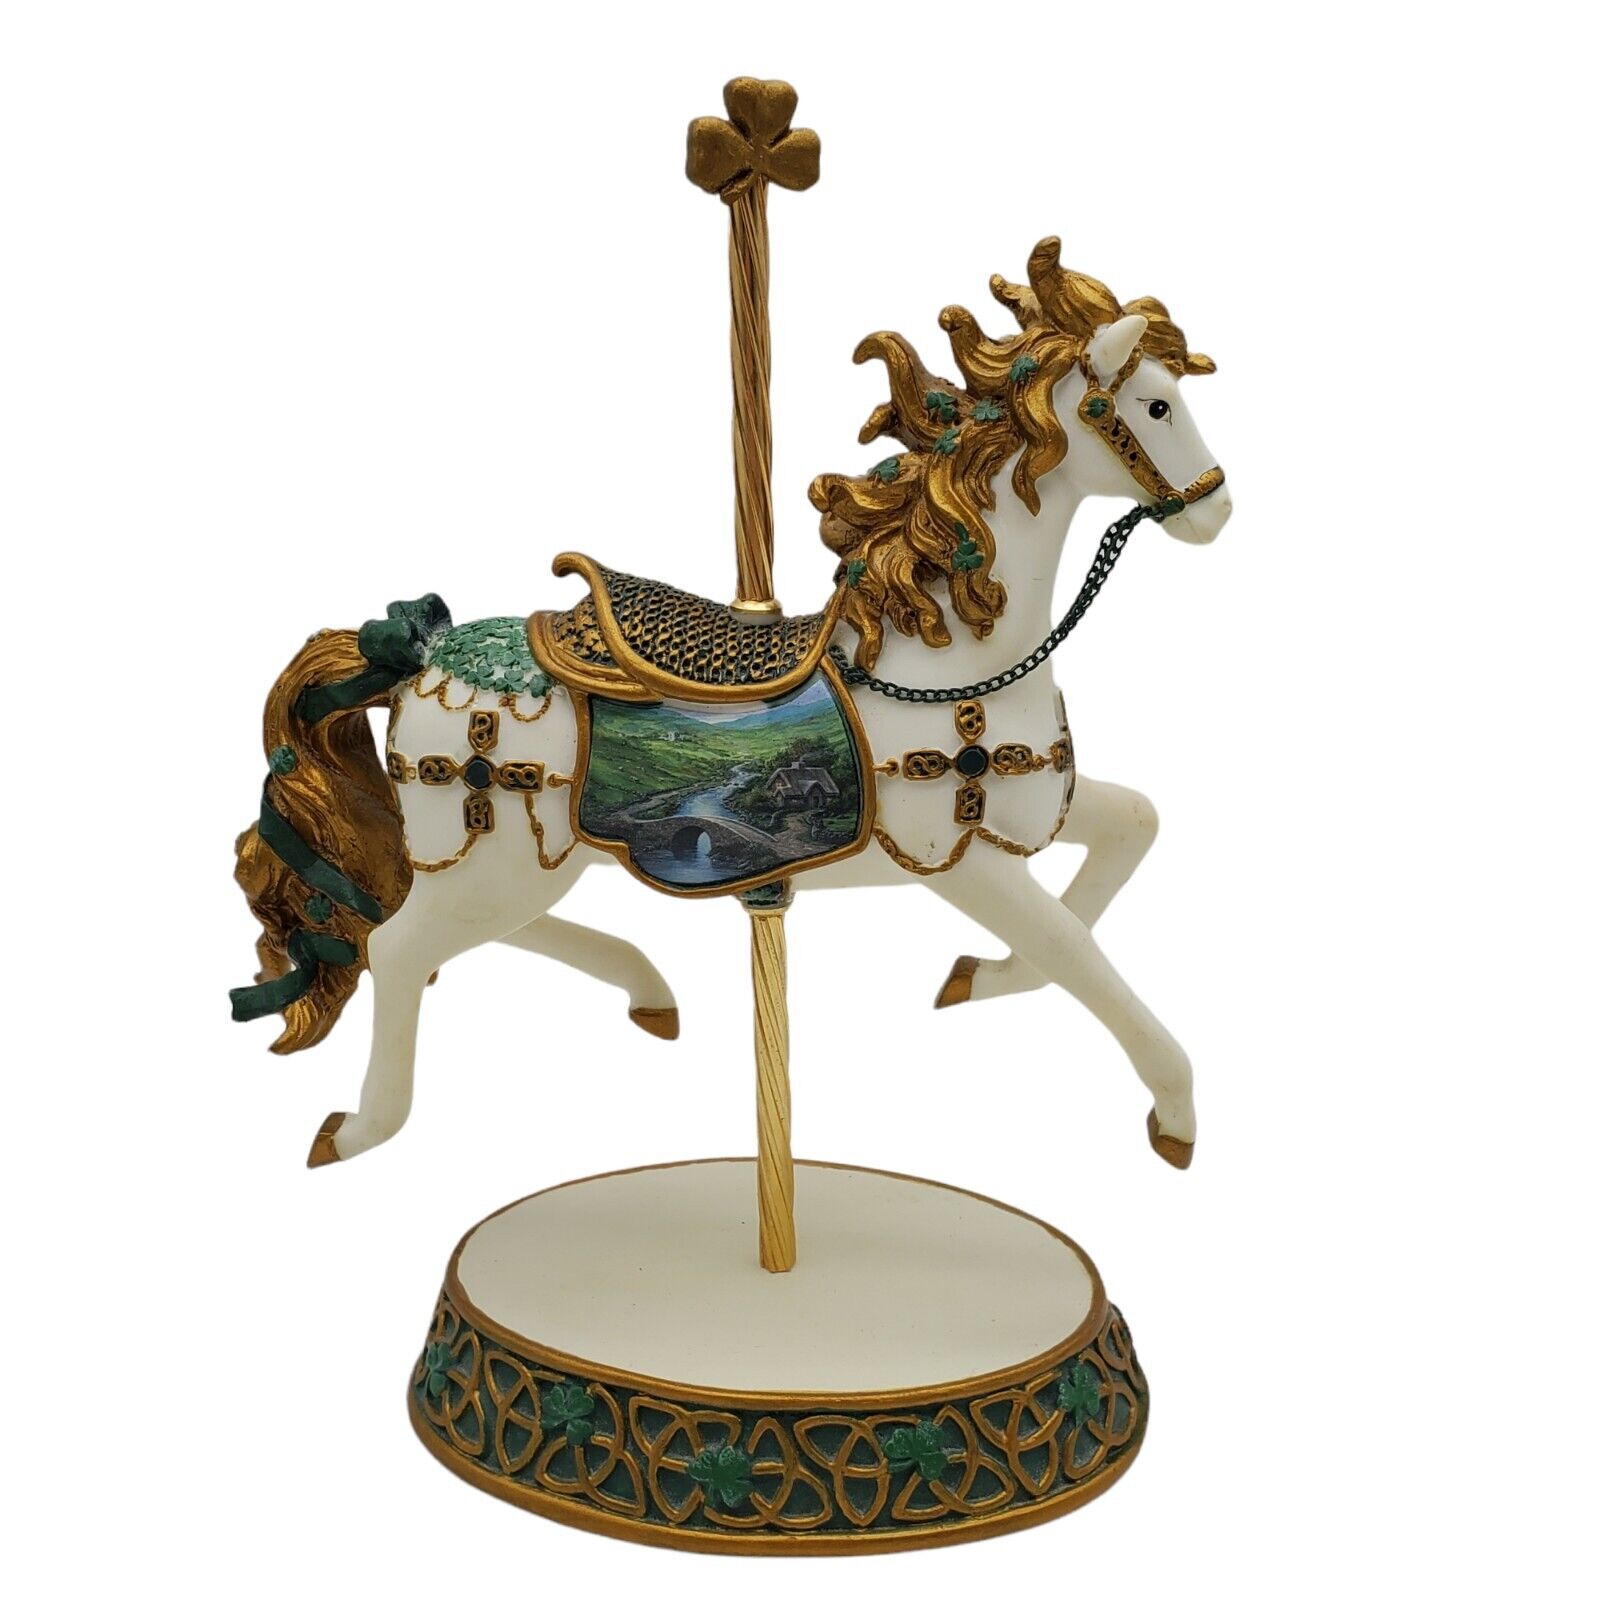 Hamilton Limited Collection Irish Blessing Carousel Horse Numbered #1152 Pony